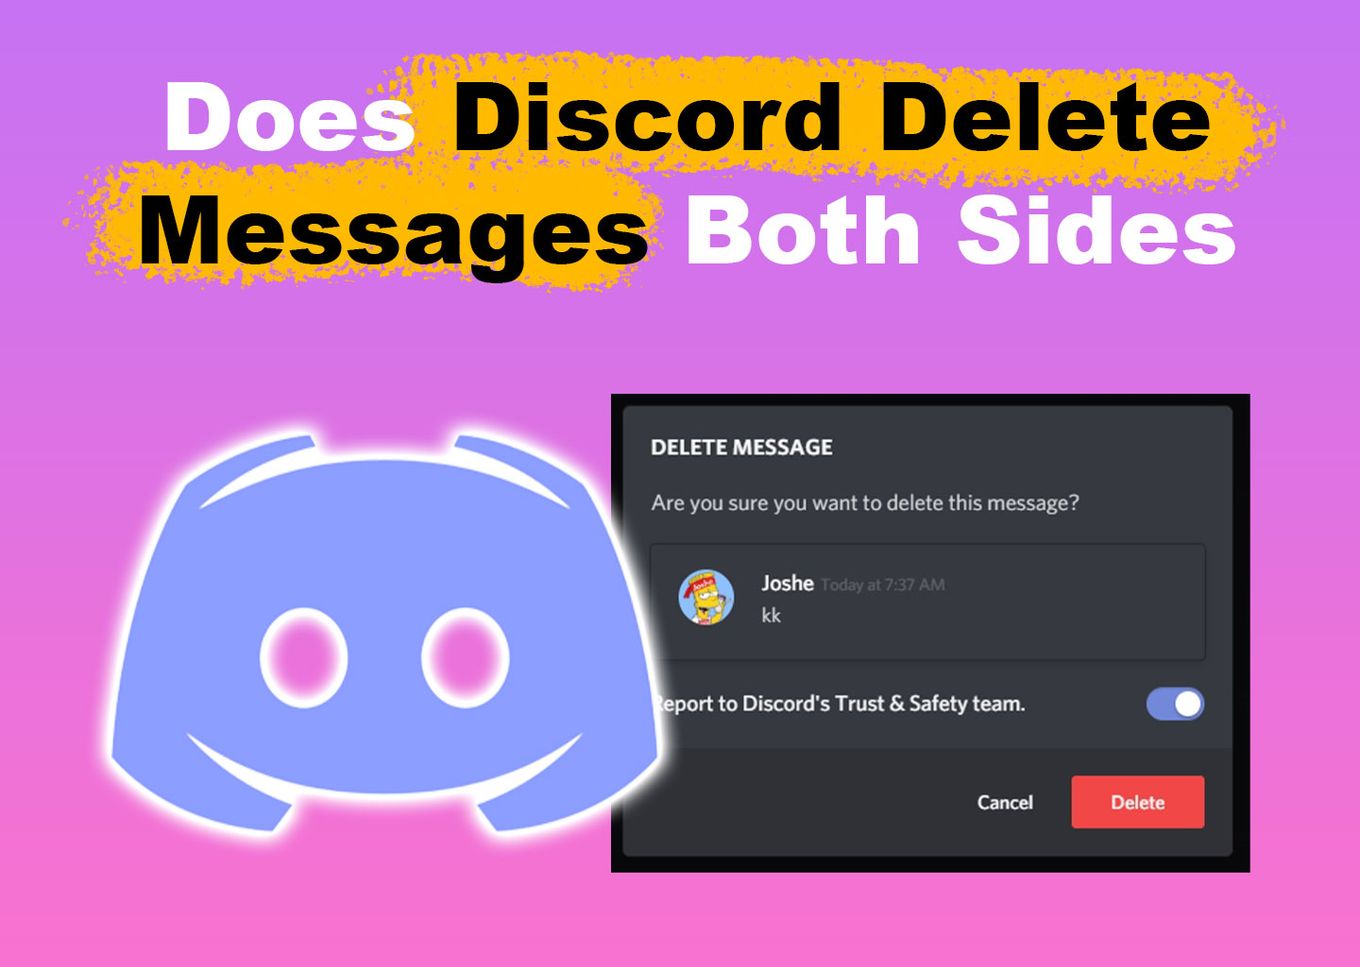 Does Discord Delete Messages Both Sides